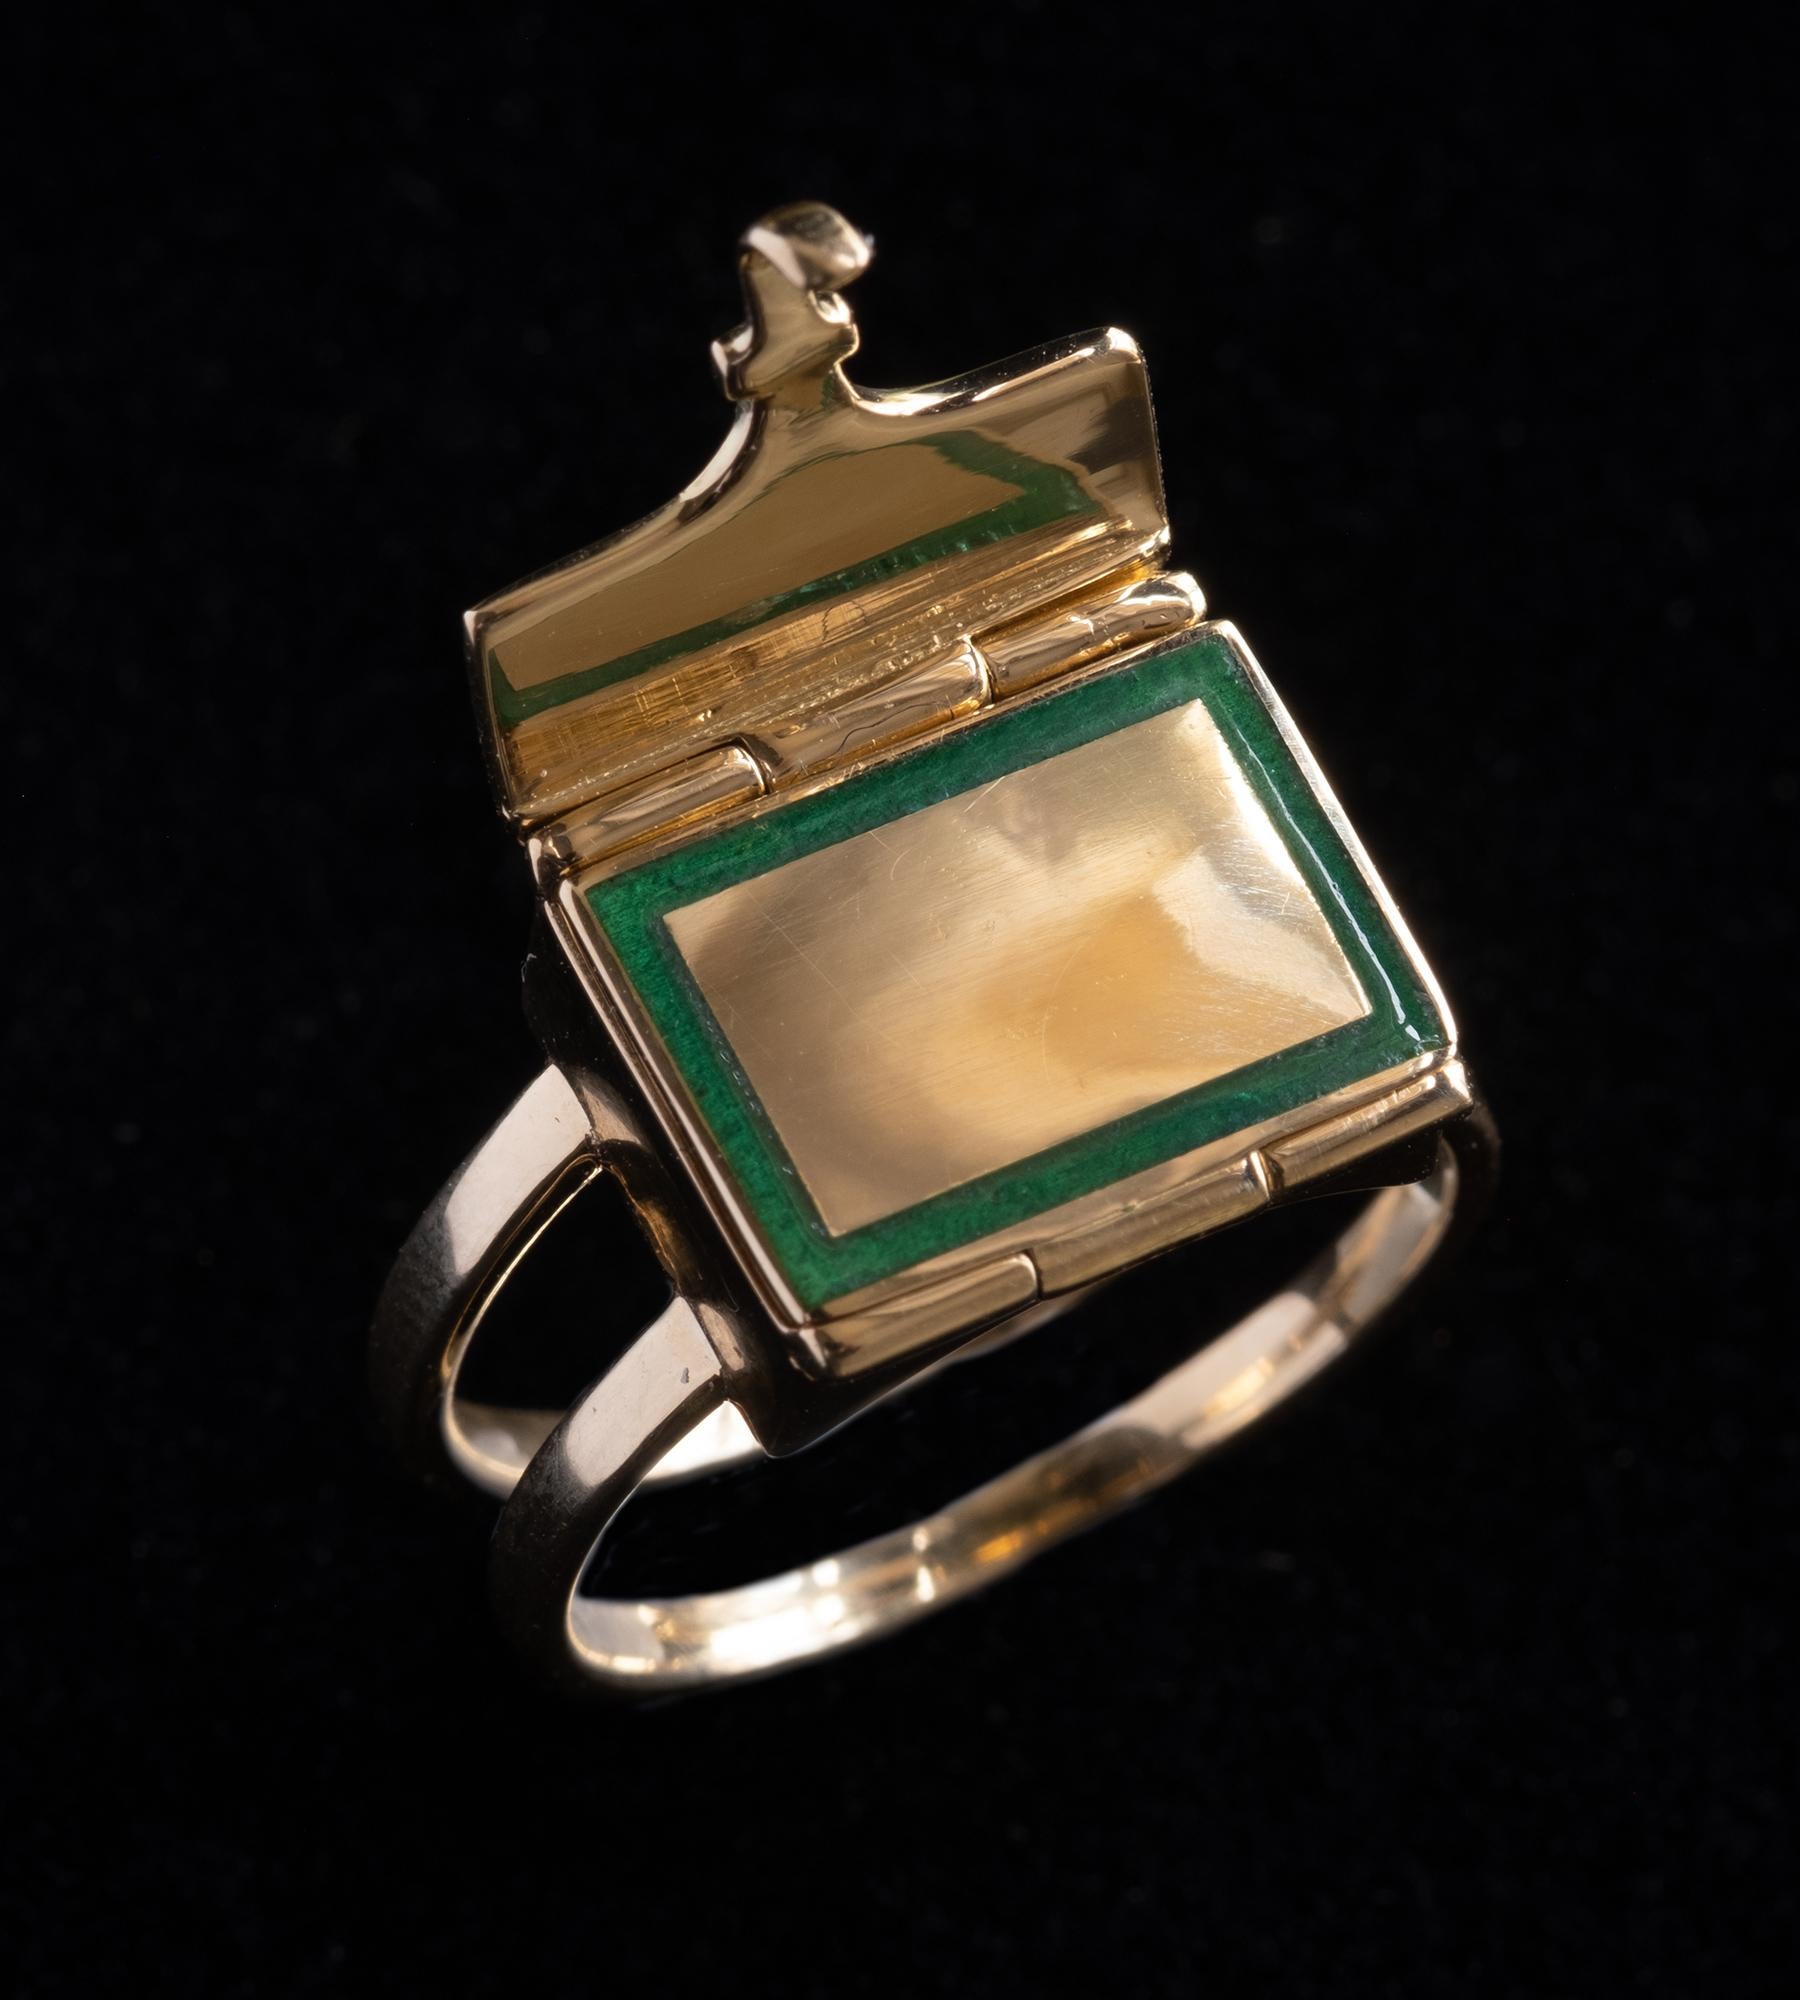 Regency The Fleur Fairfax Book Ring in 18ct Gold and Enamel - Serpentine Green US 6.75 For Sale